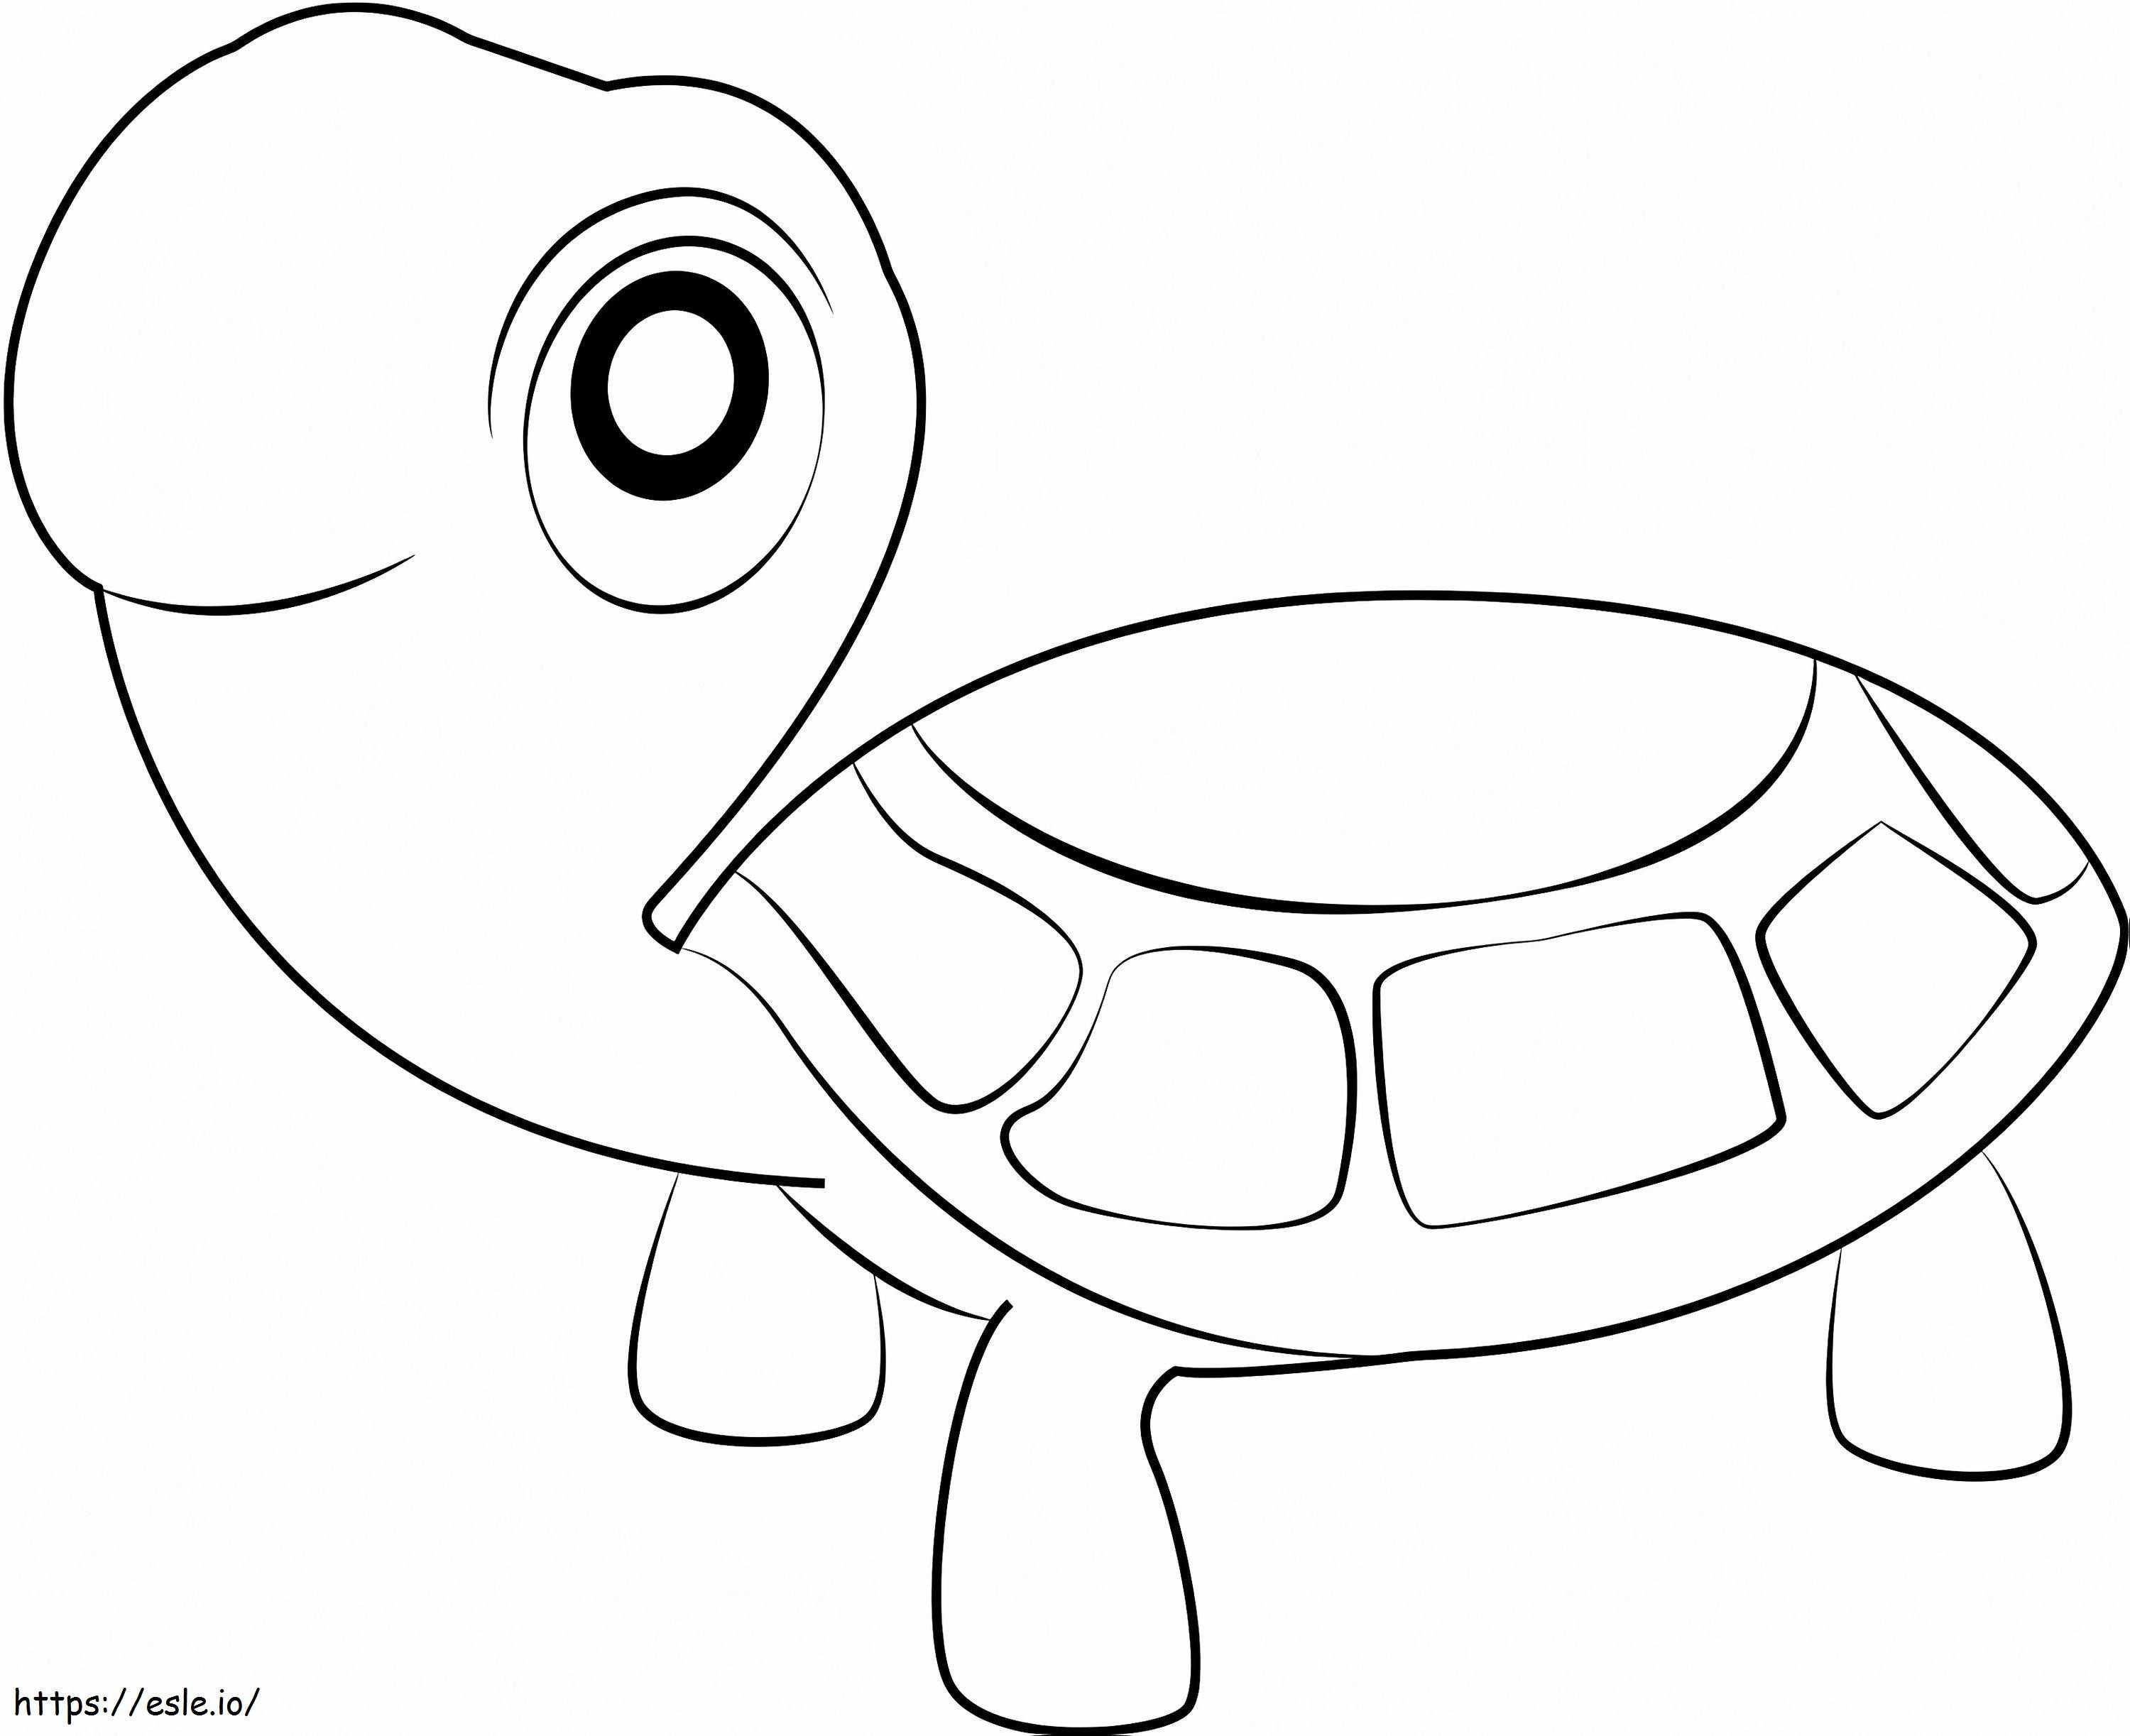 1530323207 The Turtles coloring page